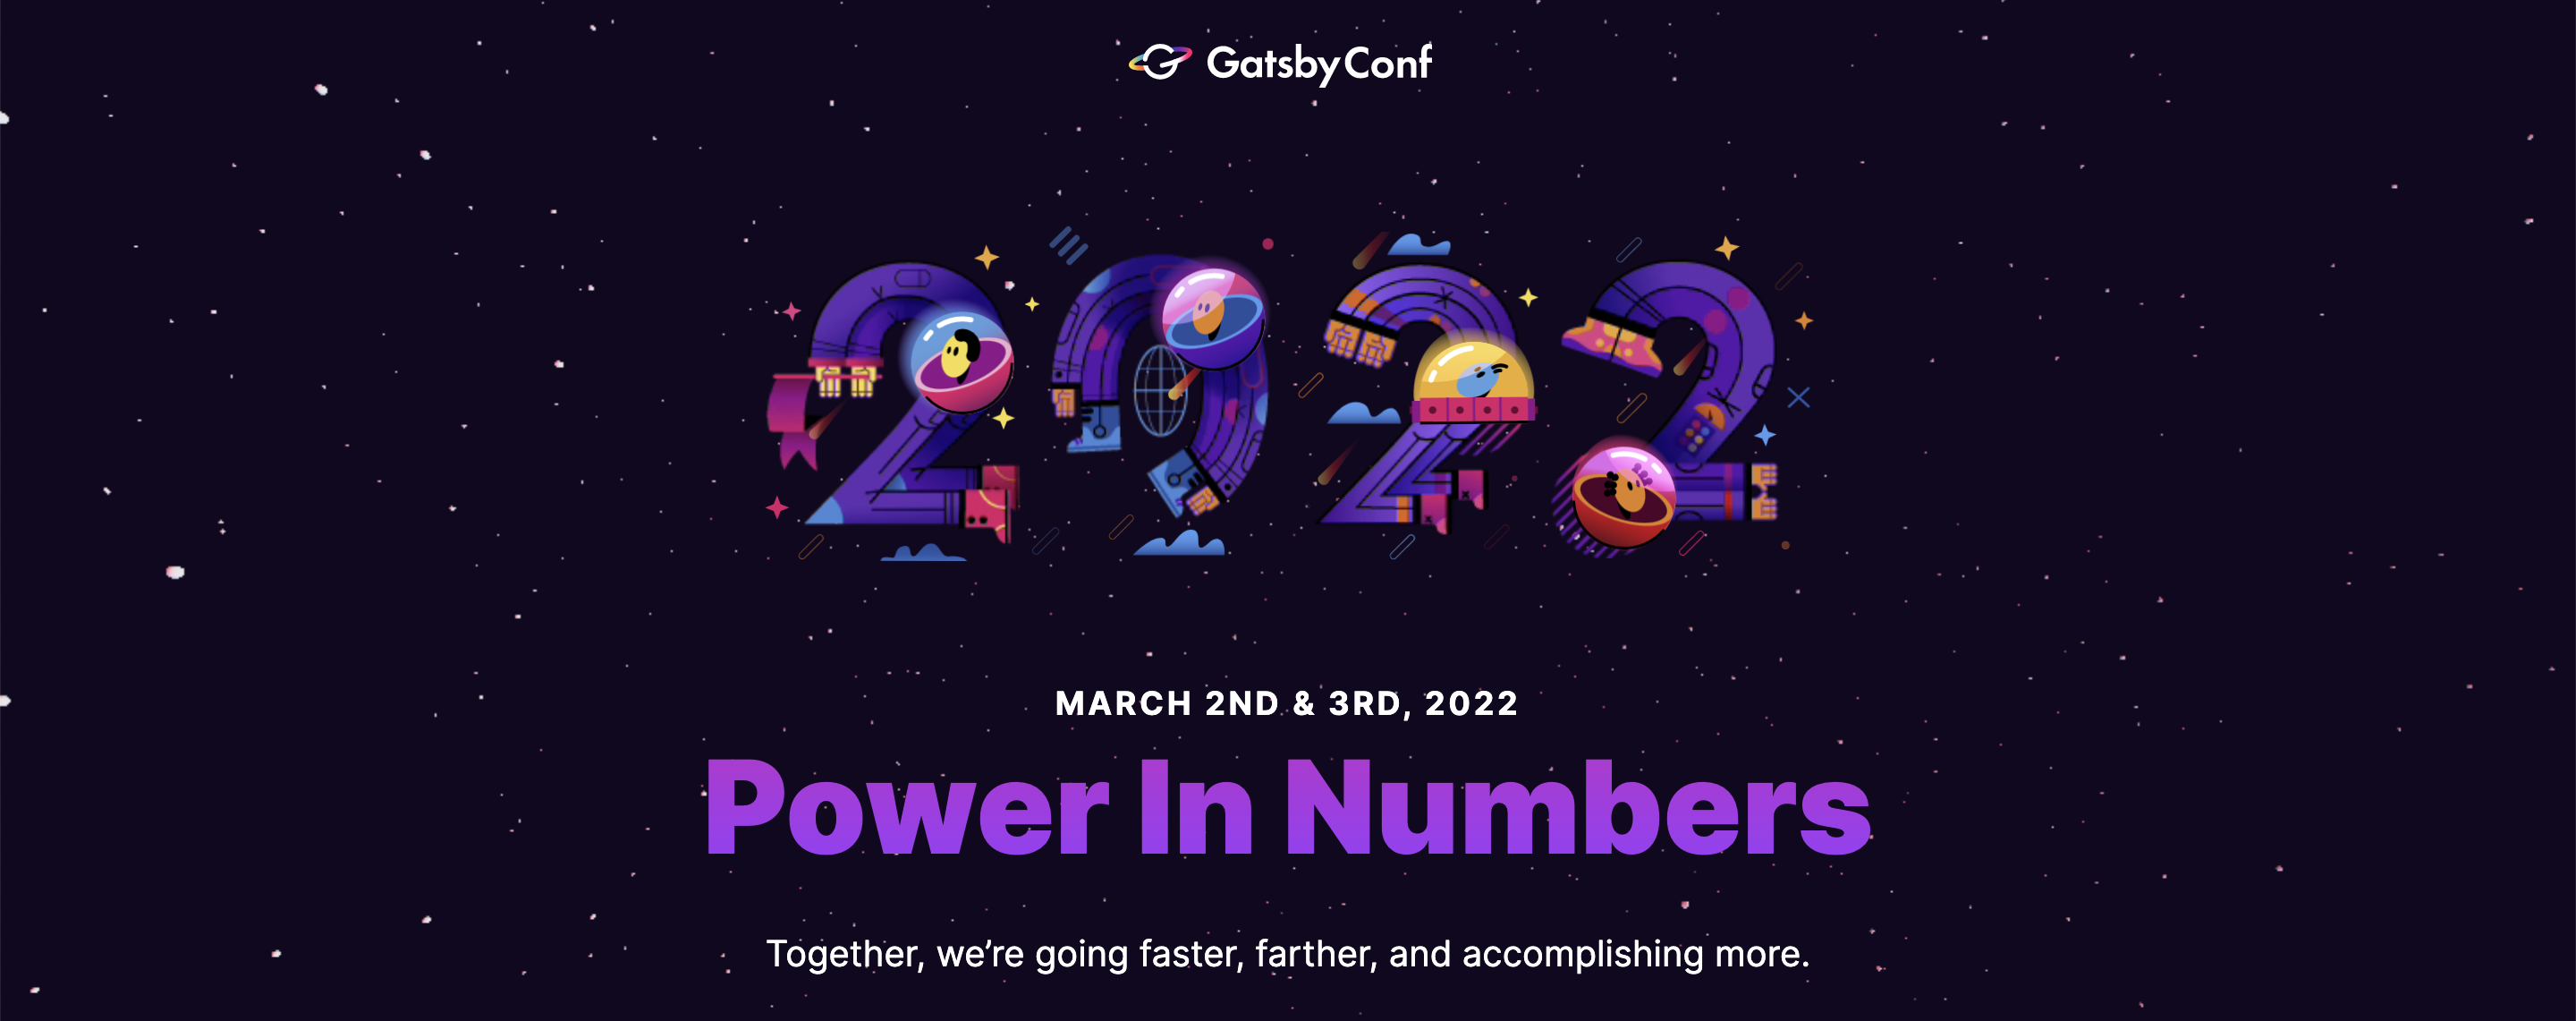 GatsbyConf 2022, March 2nd and 3rd. Power in Numbers - together, we're going faster, further, and accomplishing more.